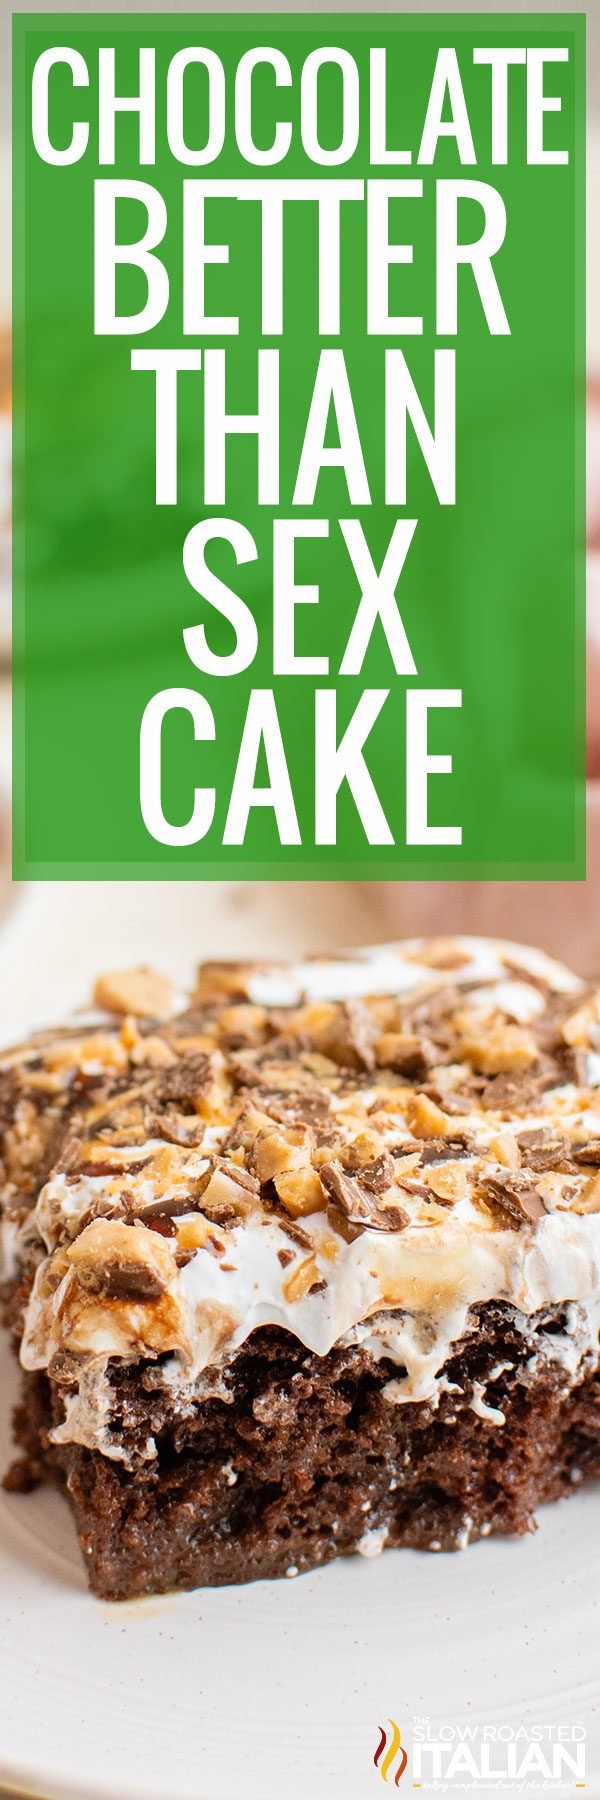 titled image (and shown): chocolate better than sex cake